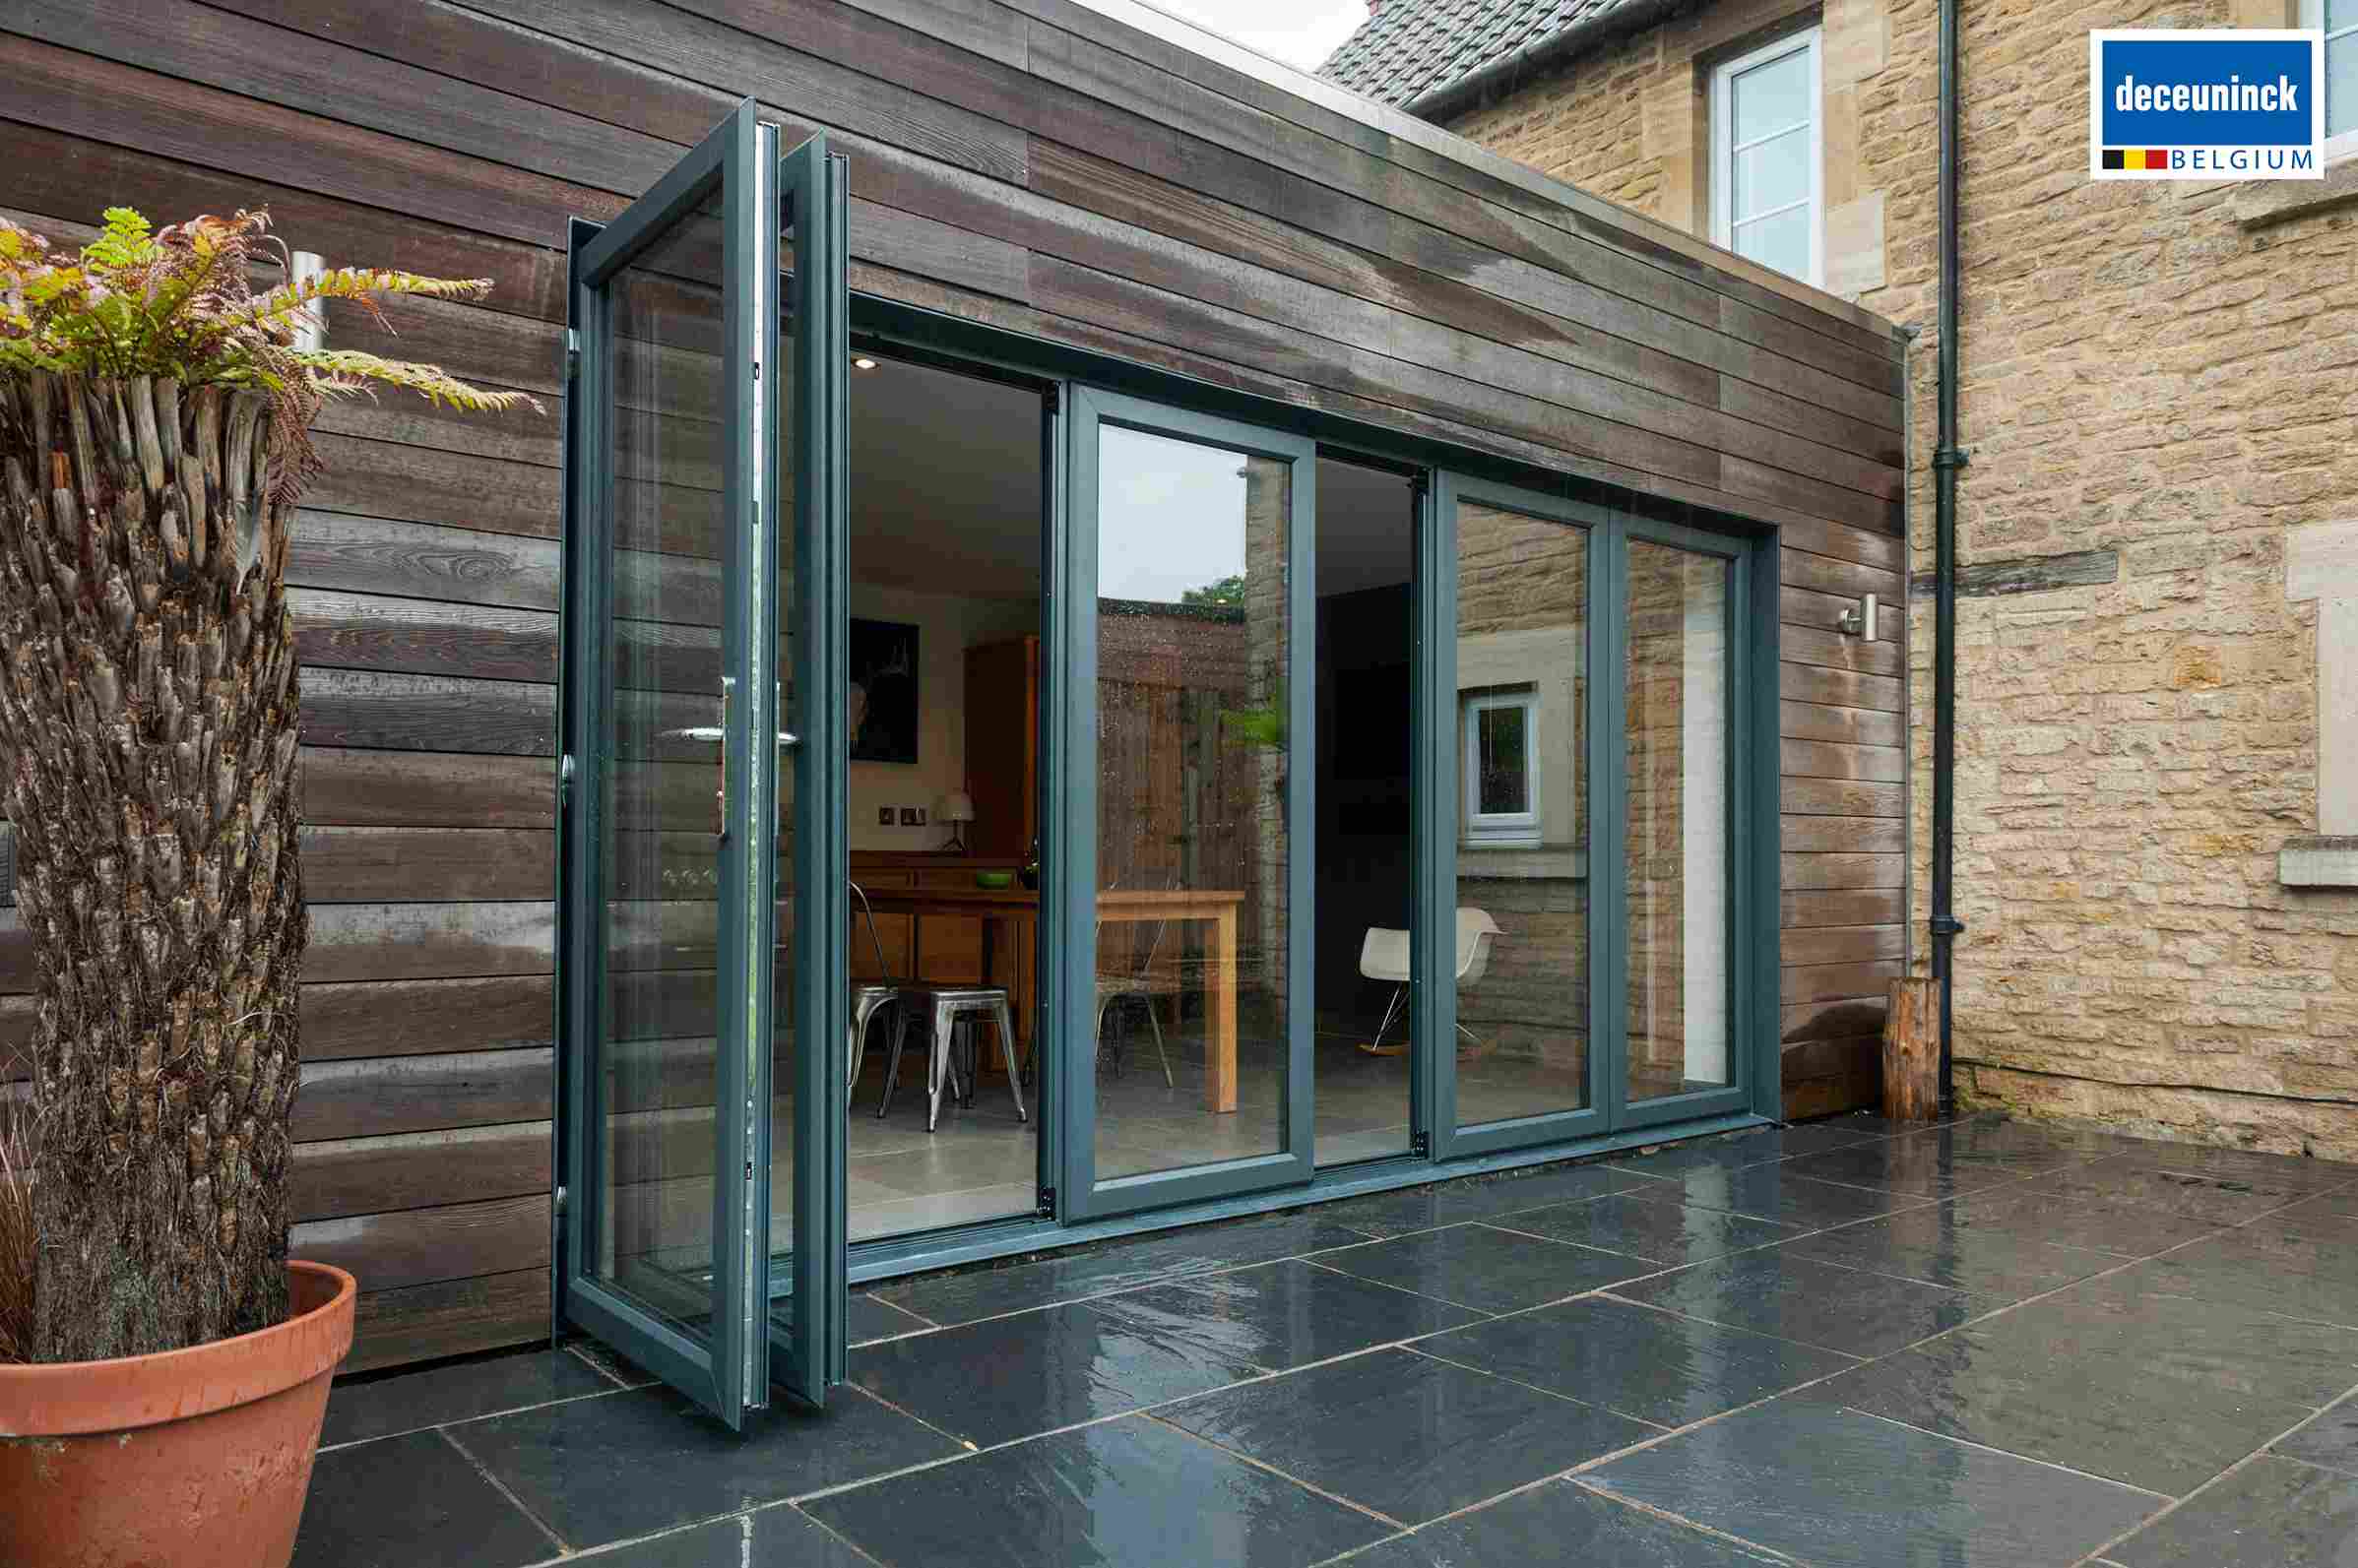 zenfold slide and swing door and window opening system for sustainable home & living